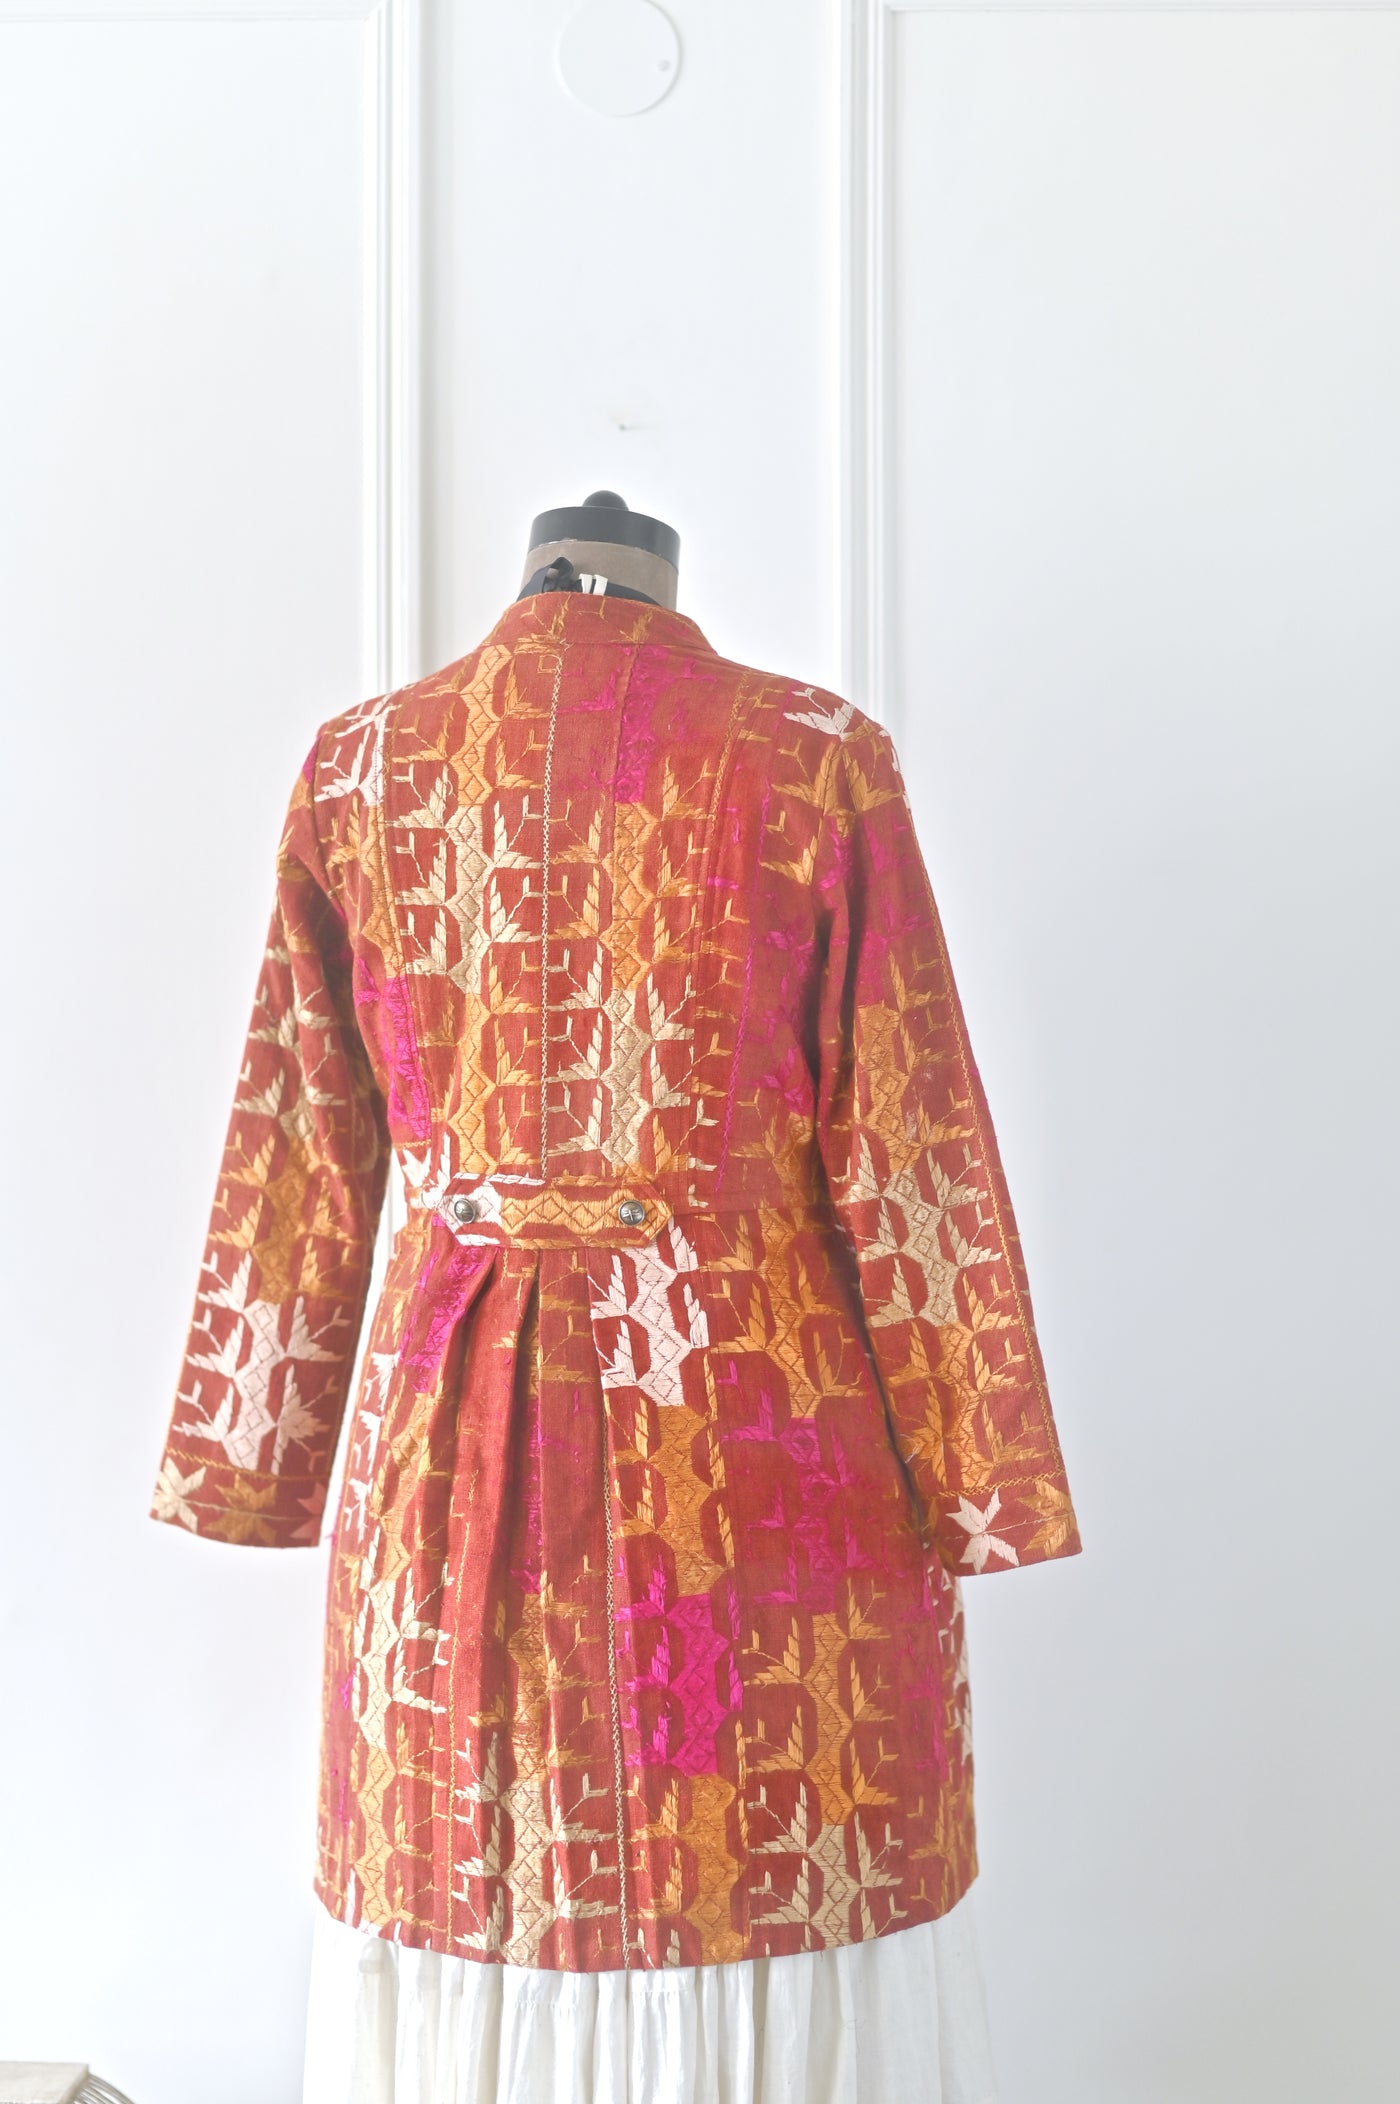 Ardas, Size large, Knee Length Jacket Made of Antique Phulkari Chaddar/ One of a Kind